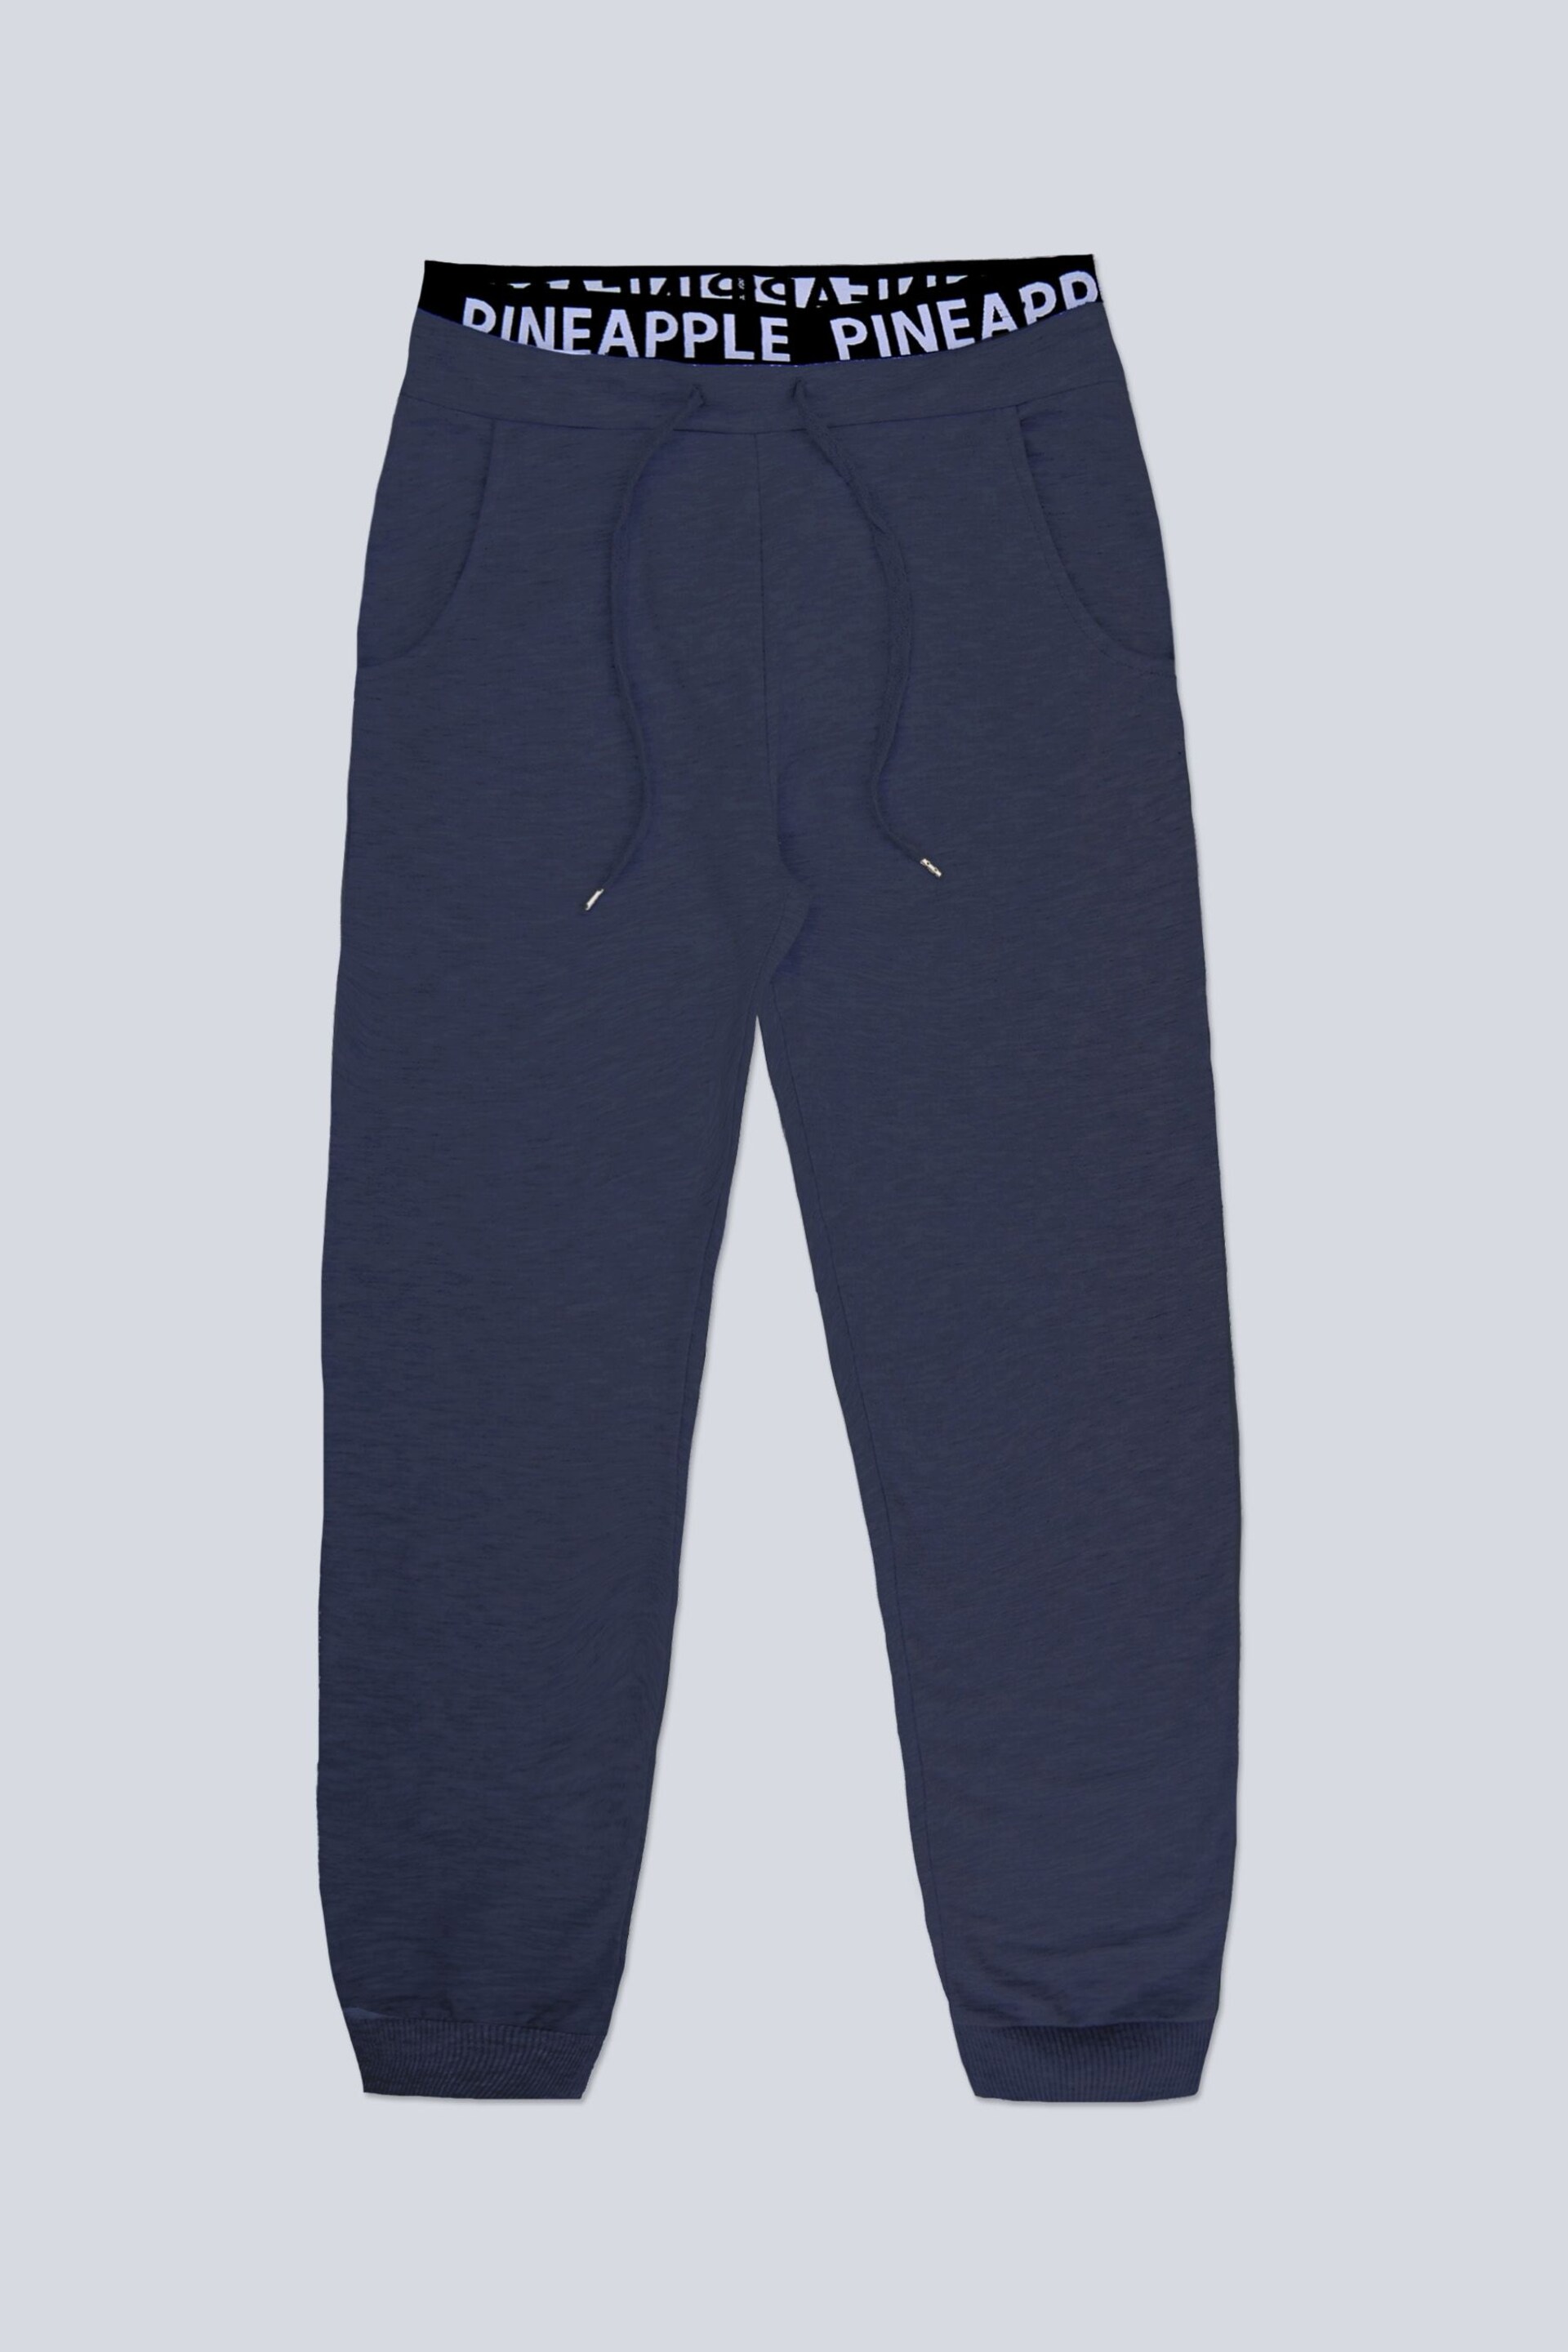 Pineapple Blue Double Waistband Joggers - Image 5 of 5